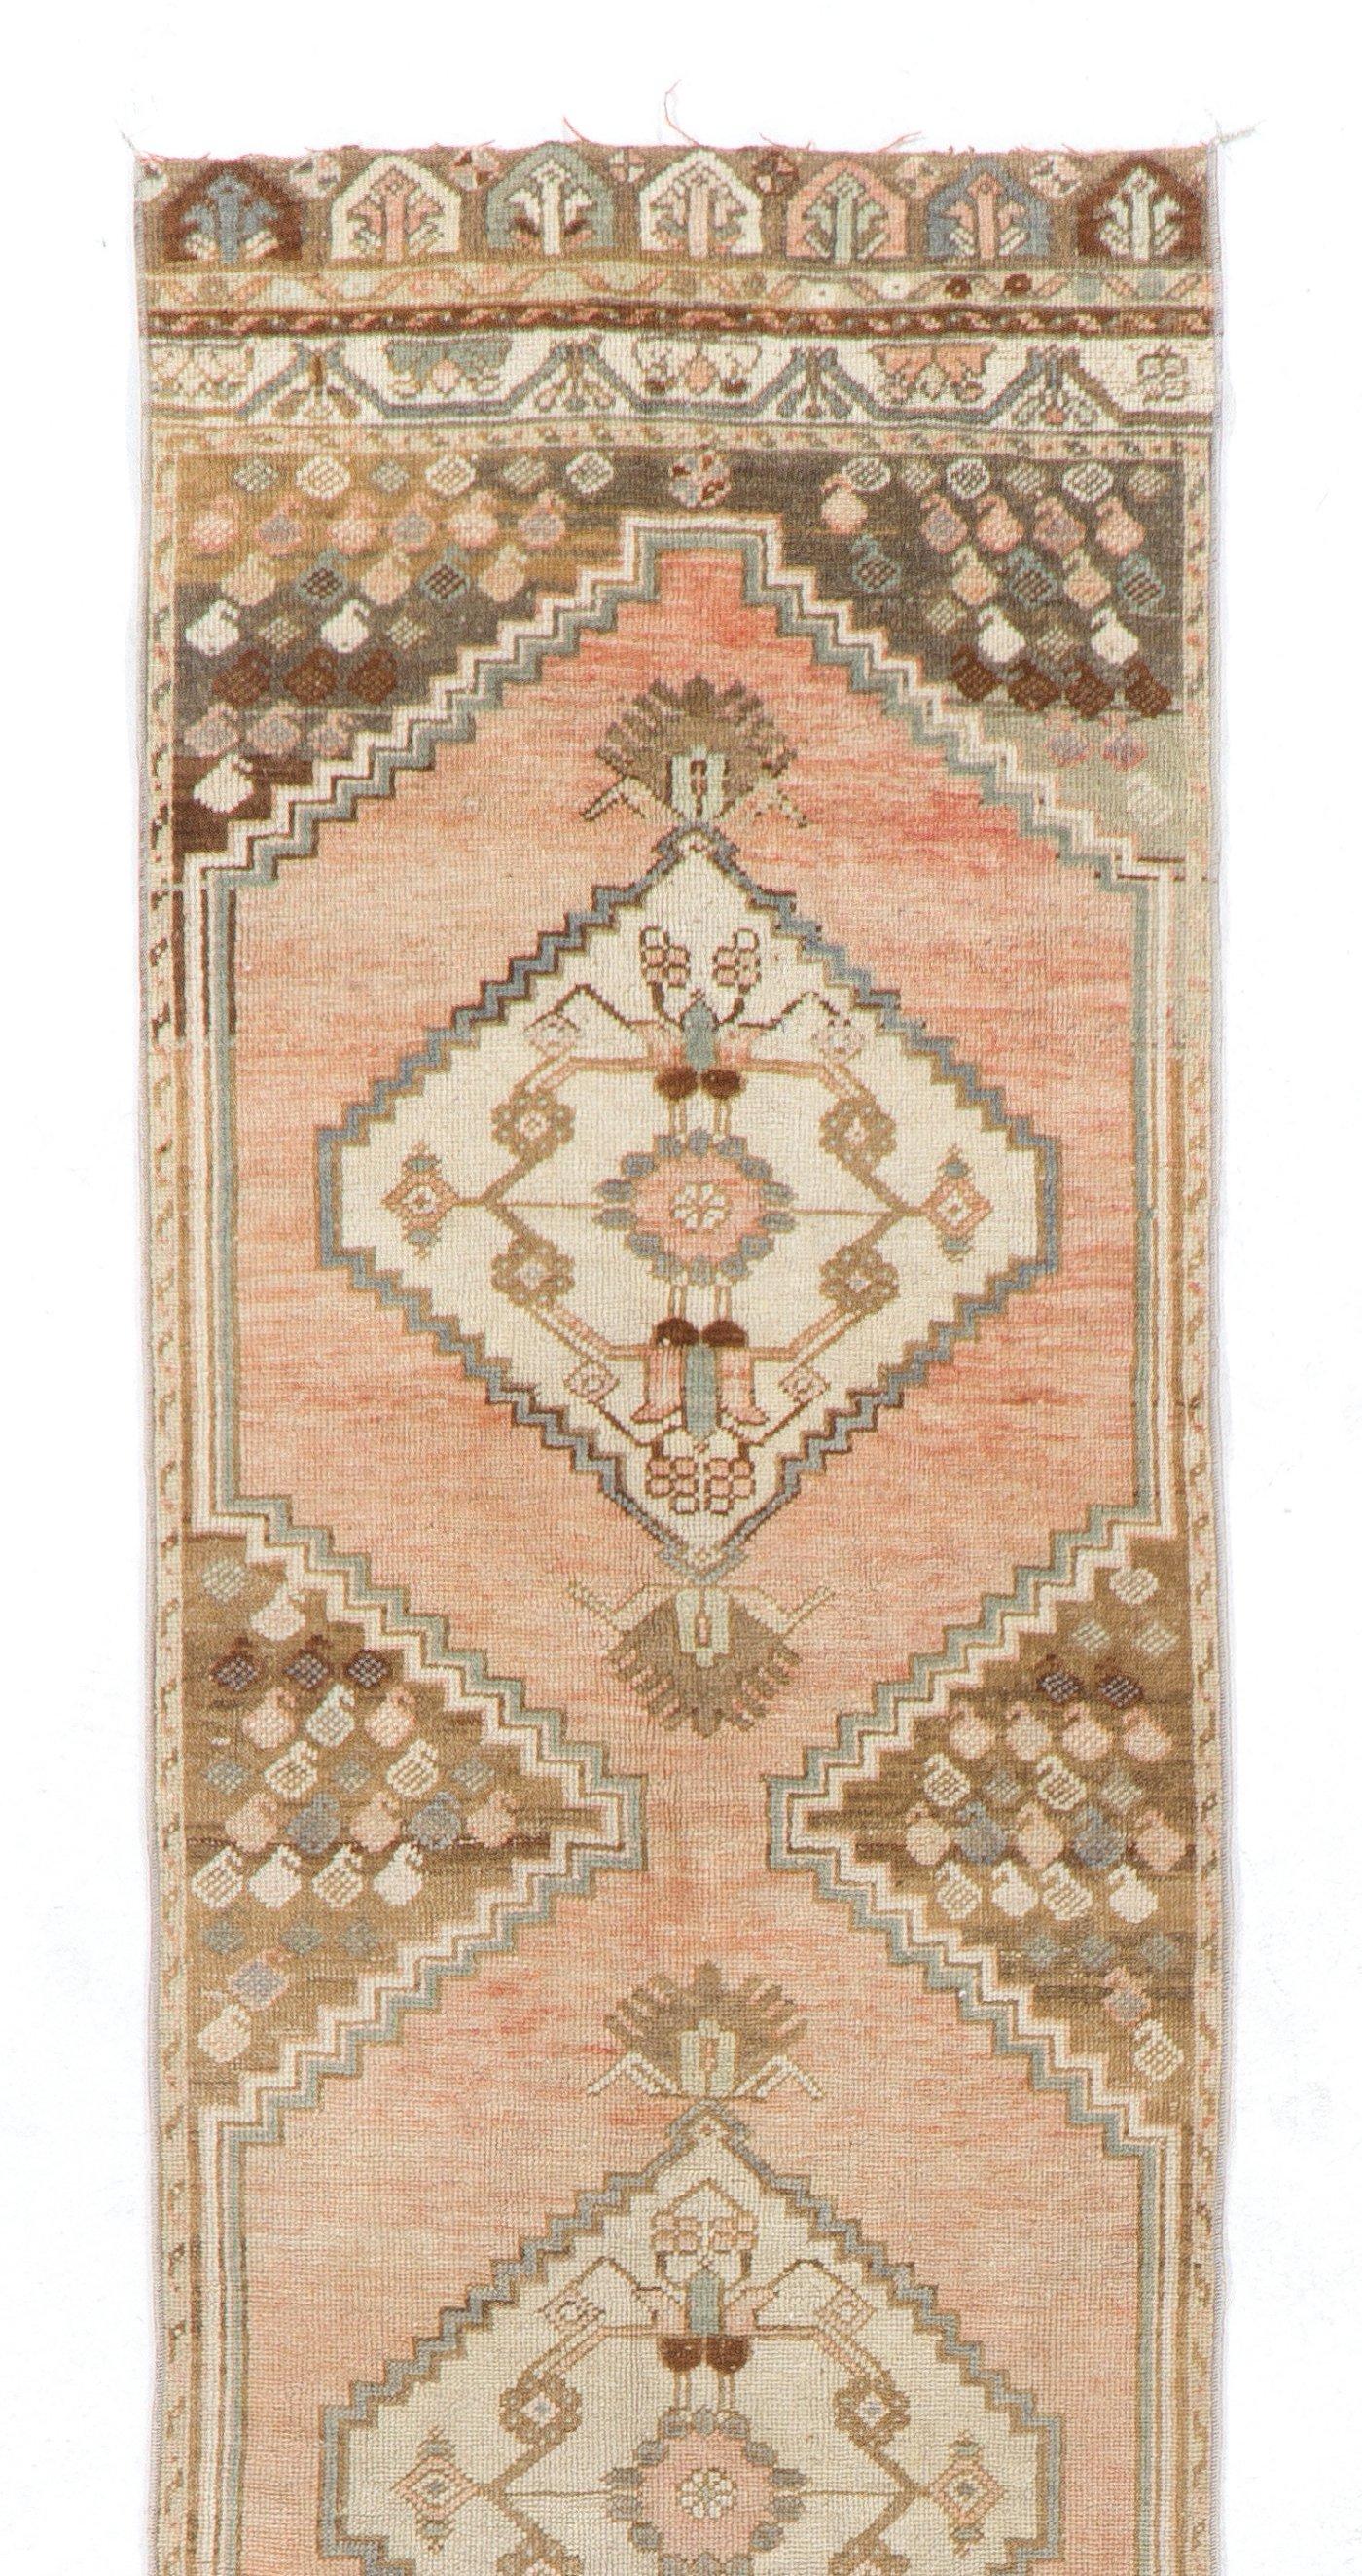 A vintage Turkish runner rug for hallway decor. It was hand-knotted in the 1960s with even medium wool pile on wool foundation and features a geometric design. It is in very good condition, professionally-washed, sturdy and suitable for areas with